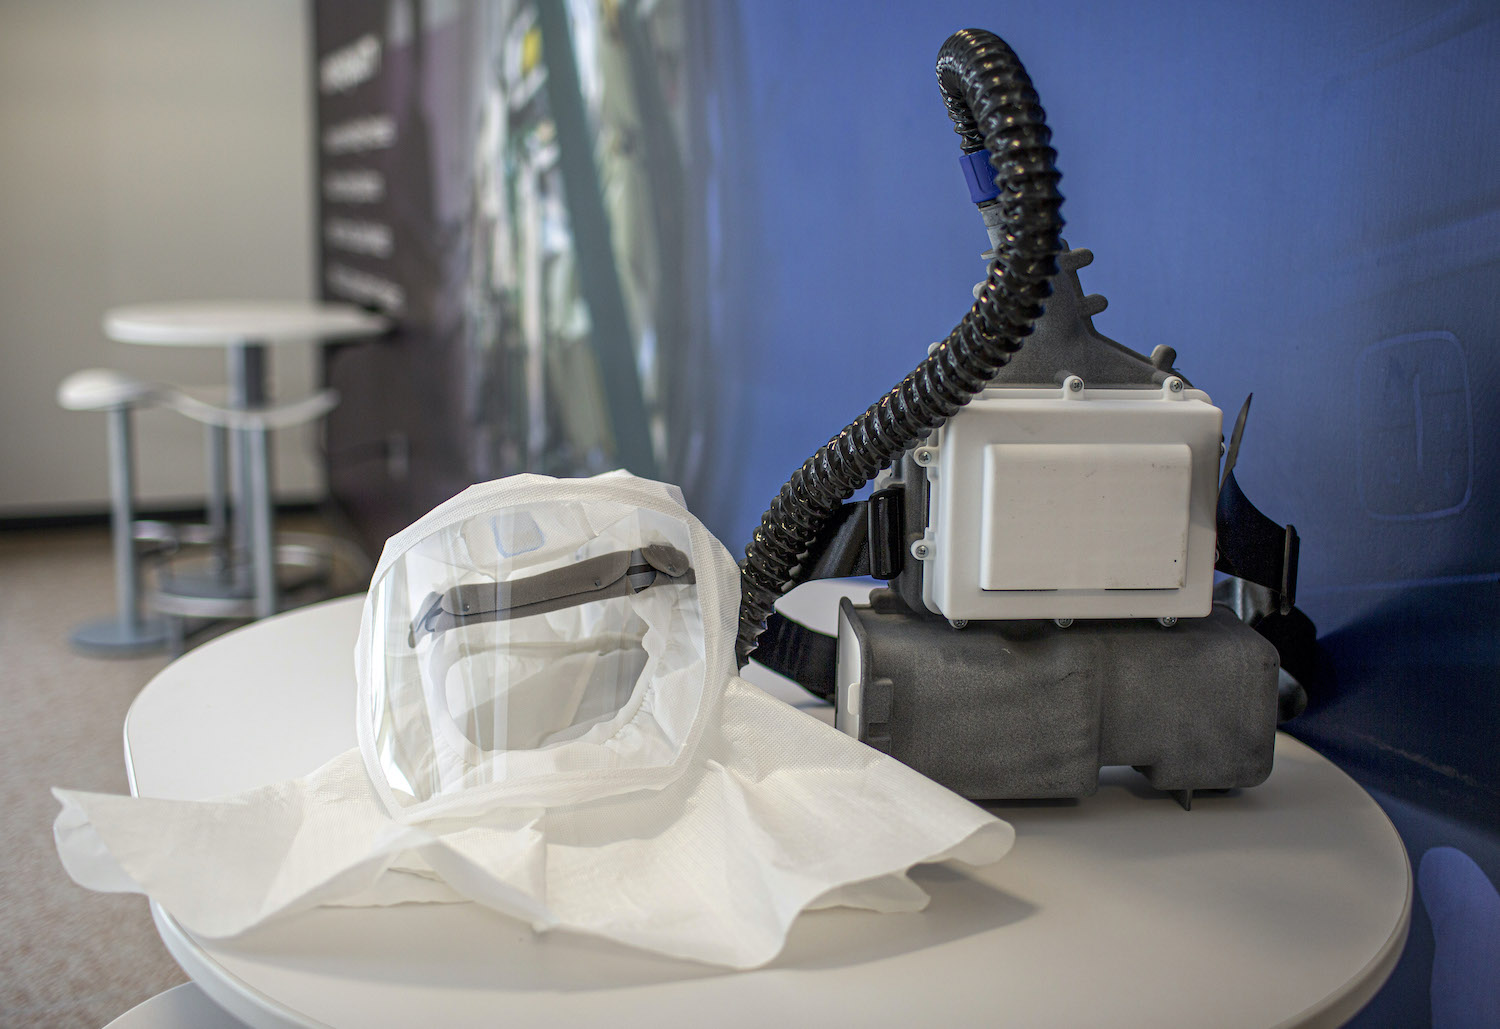 Ford Powered Air-Purifying Respirator (PAPR)